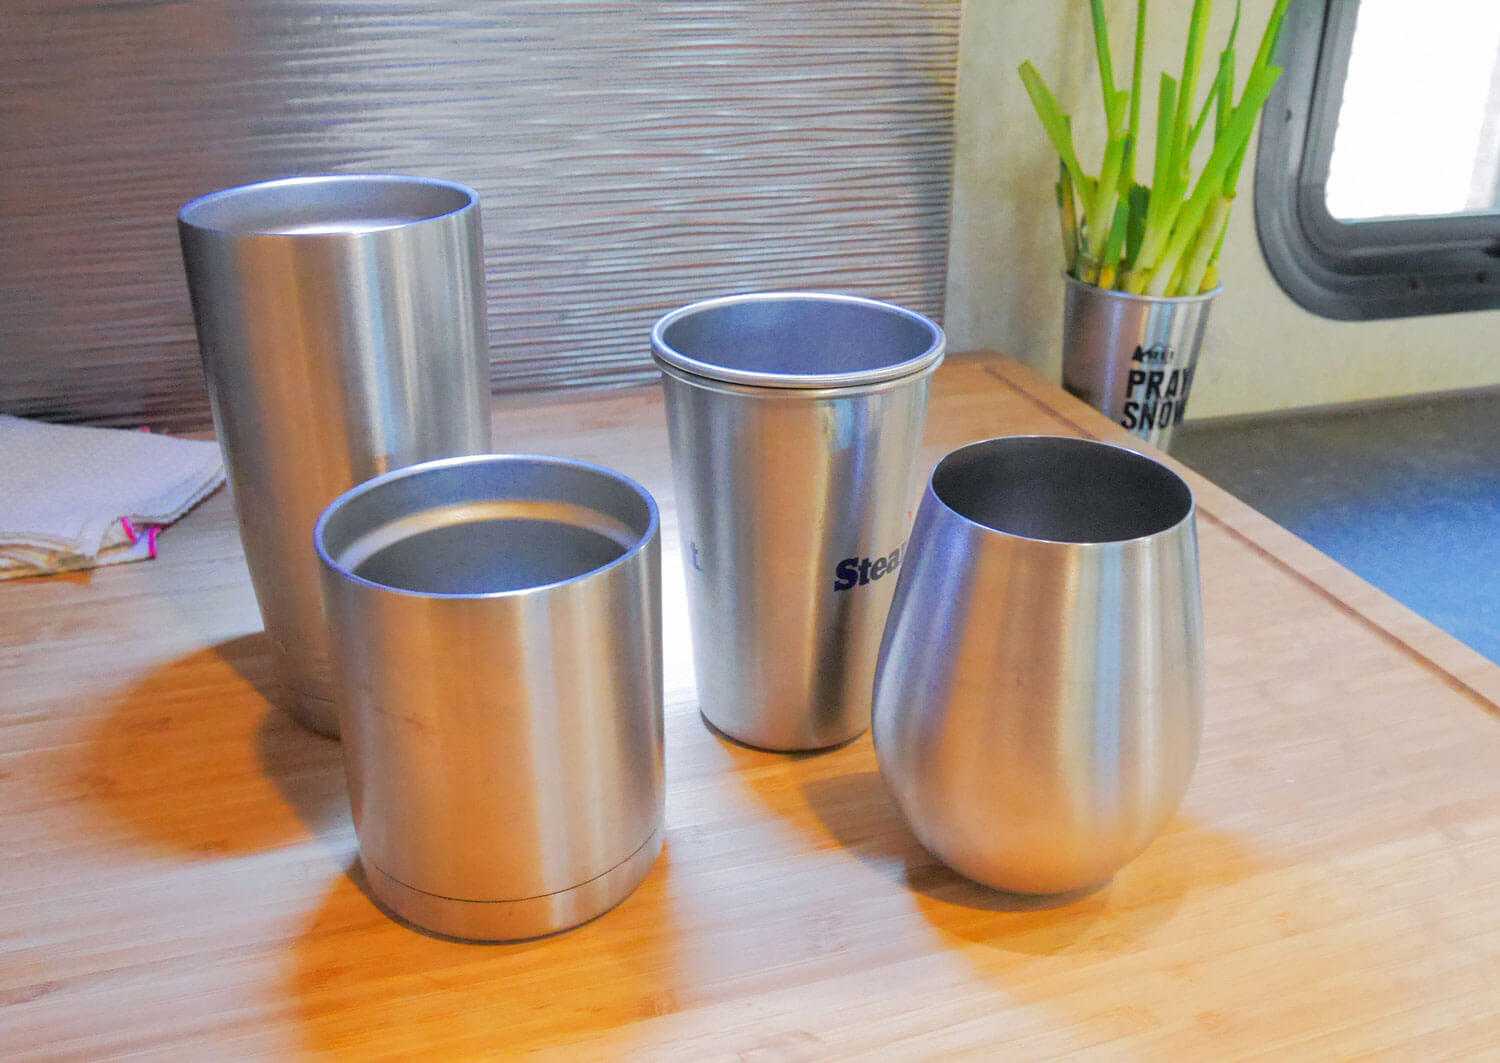 stainless steel wine glasses, cups, and tumblers in an RV